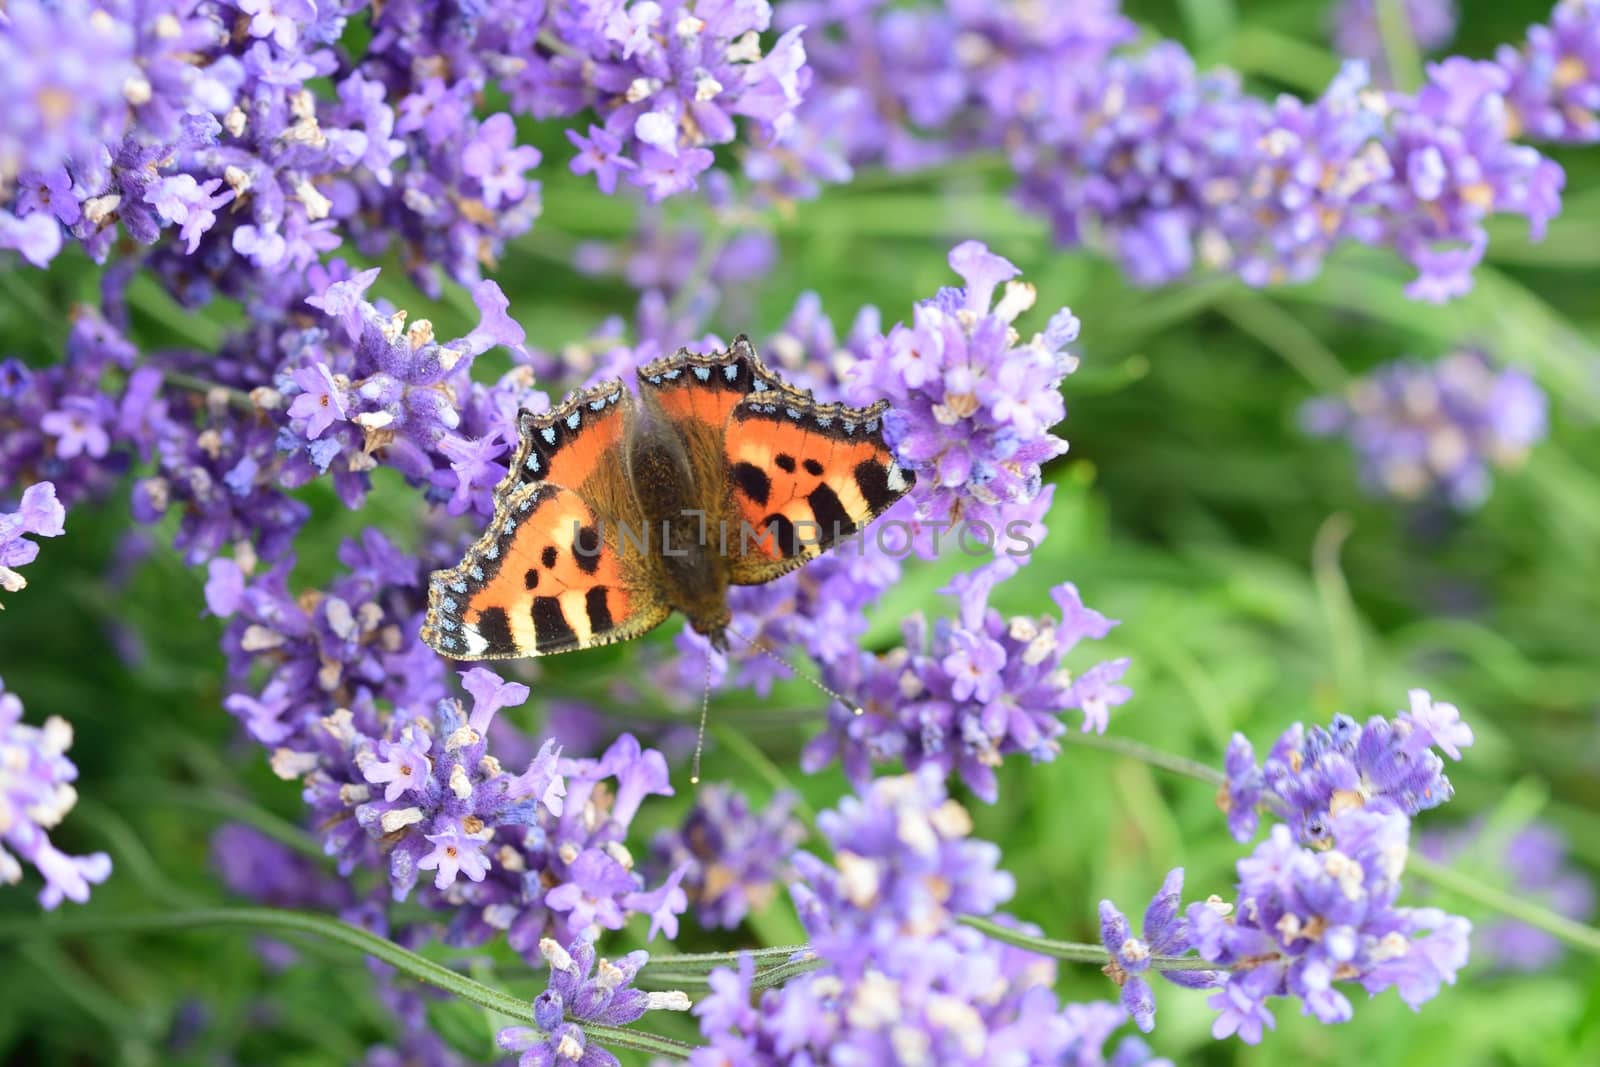 Butterfly and lavendar background by pauws99